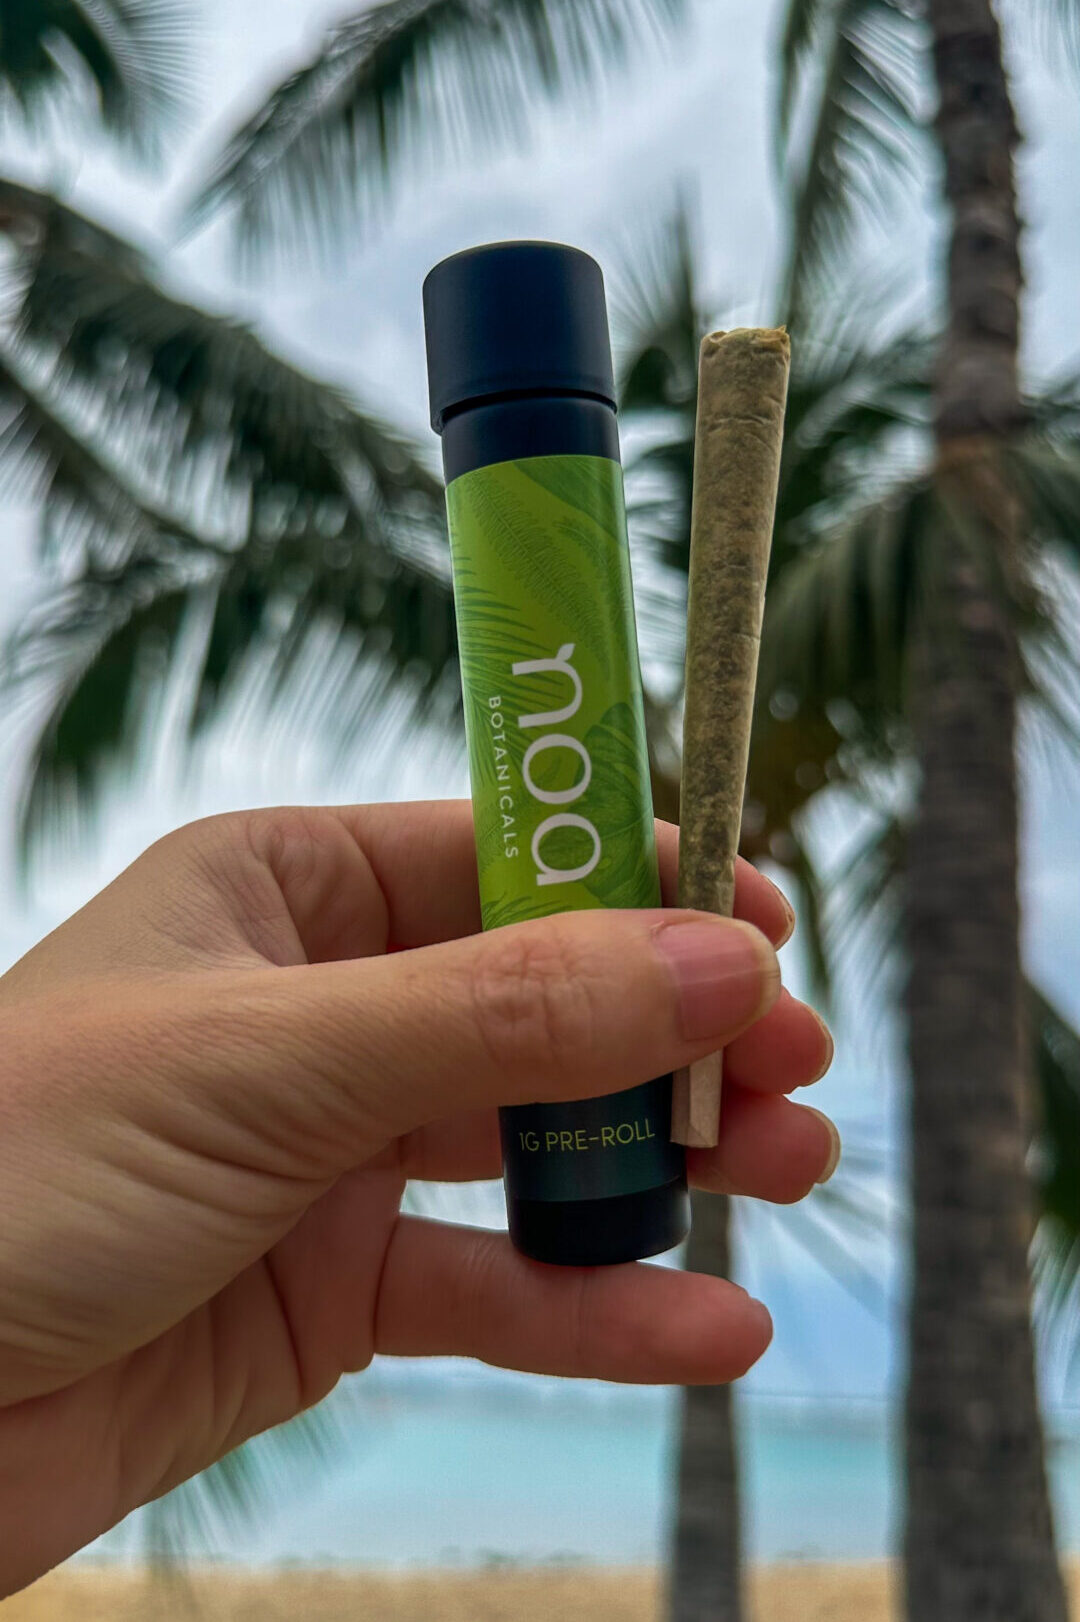 A hand holding a pre-rolled cannabis joint and container with a blurred background of palm trees and a beach.